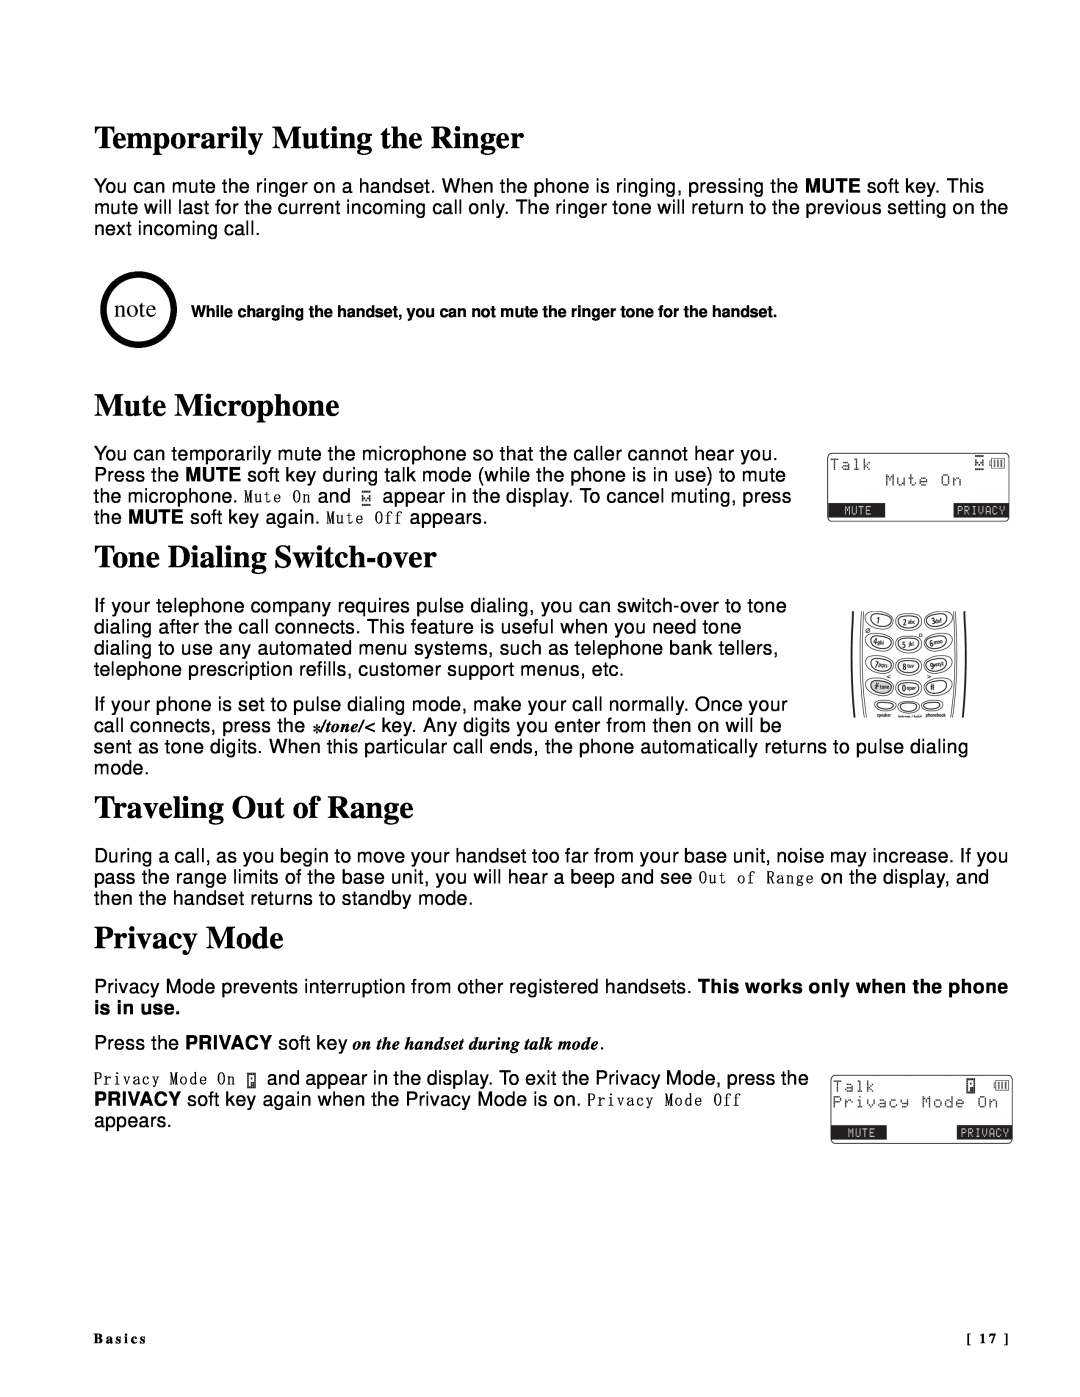 NEC DTR-IR-2 user manual Temporarily Muting the Ringer, Mute Microphone, Tone Dialing Switch-over, Traveling Out of Range 